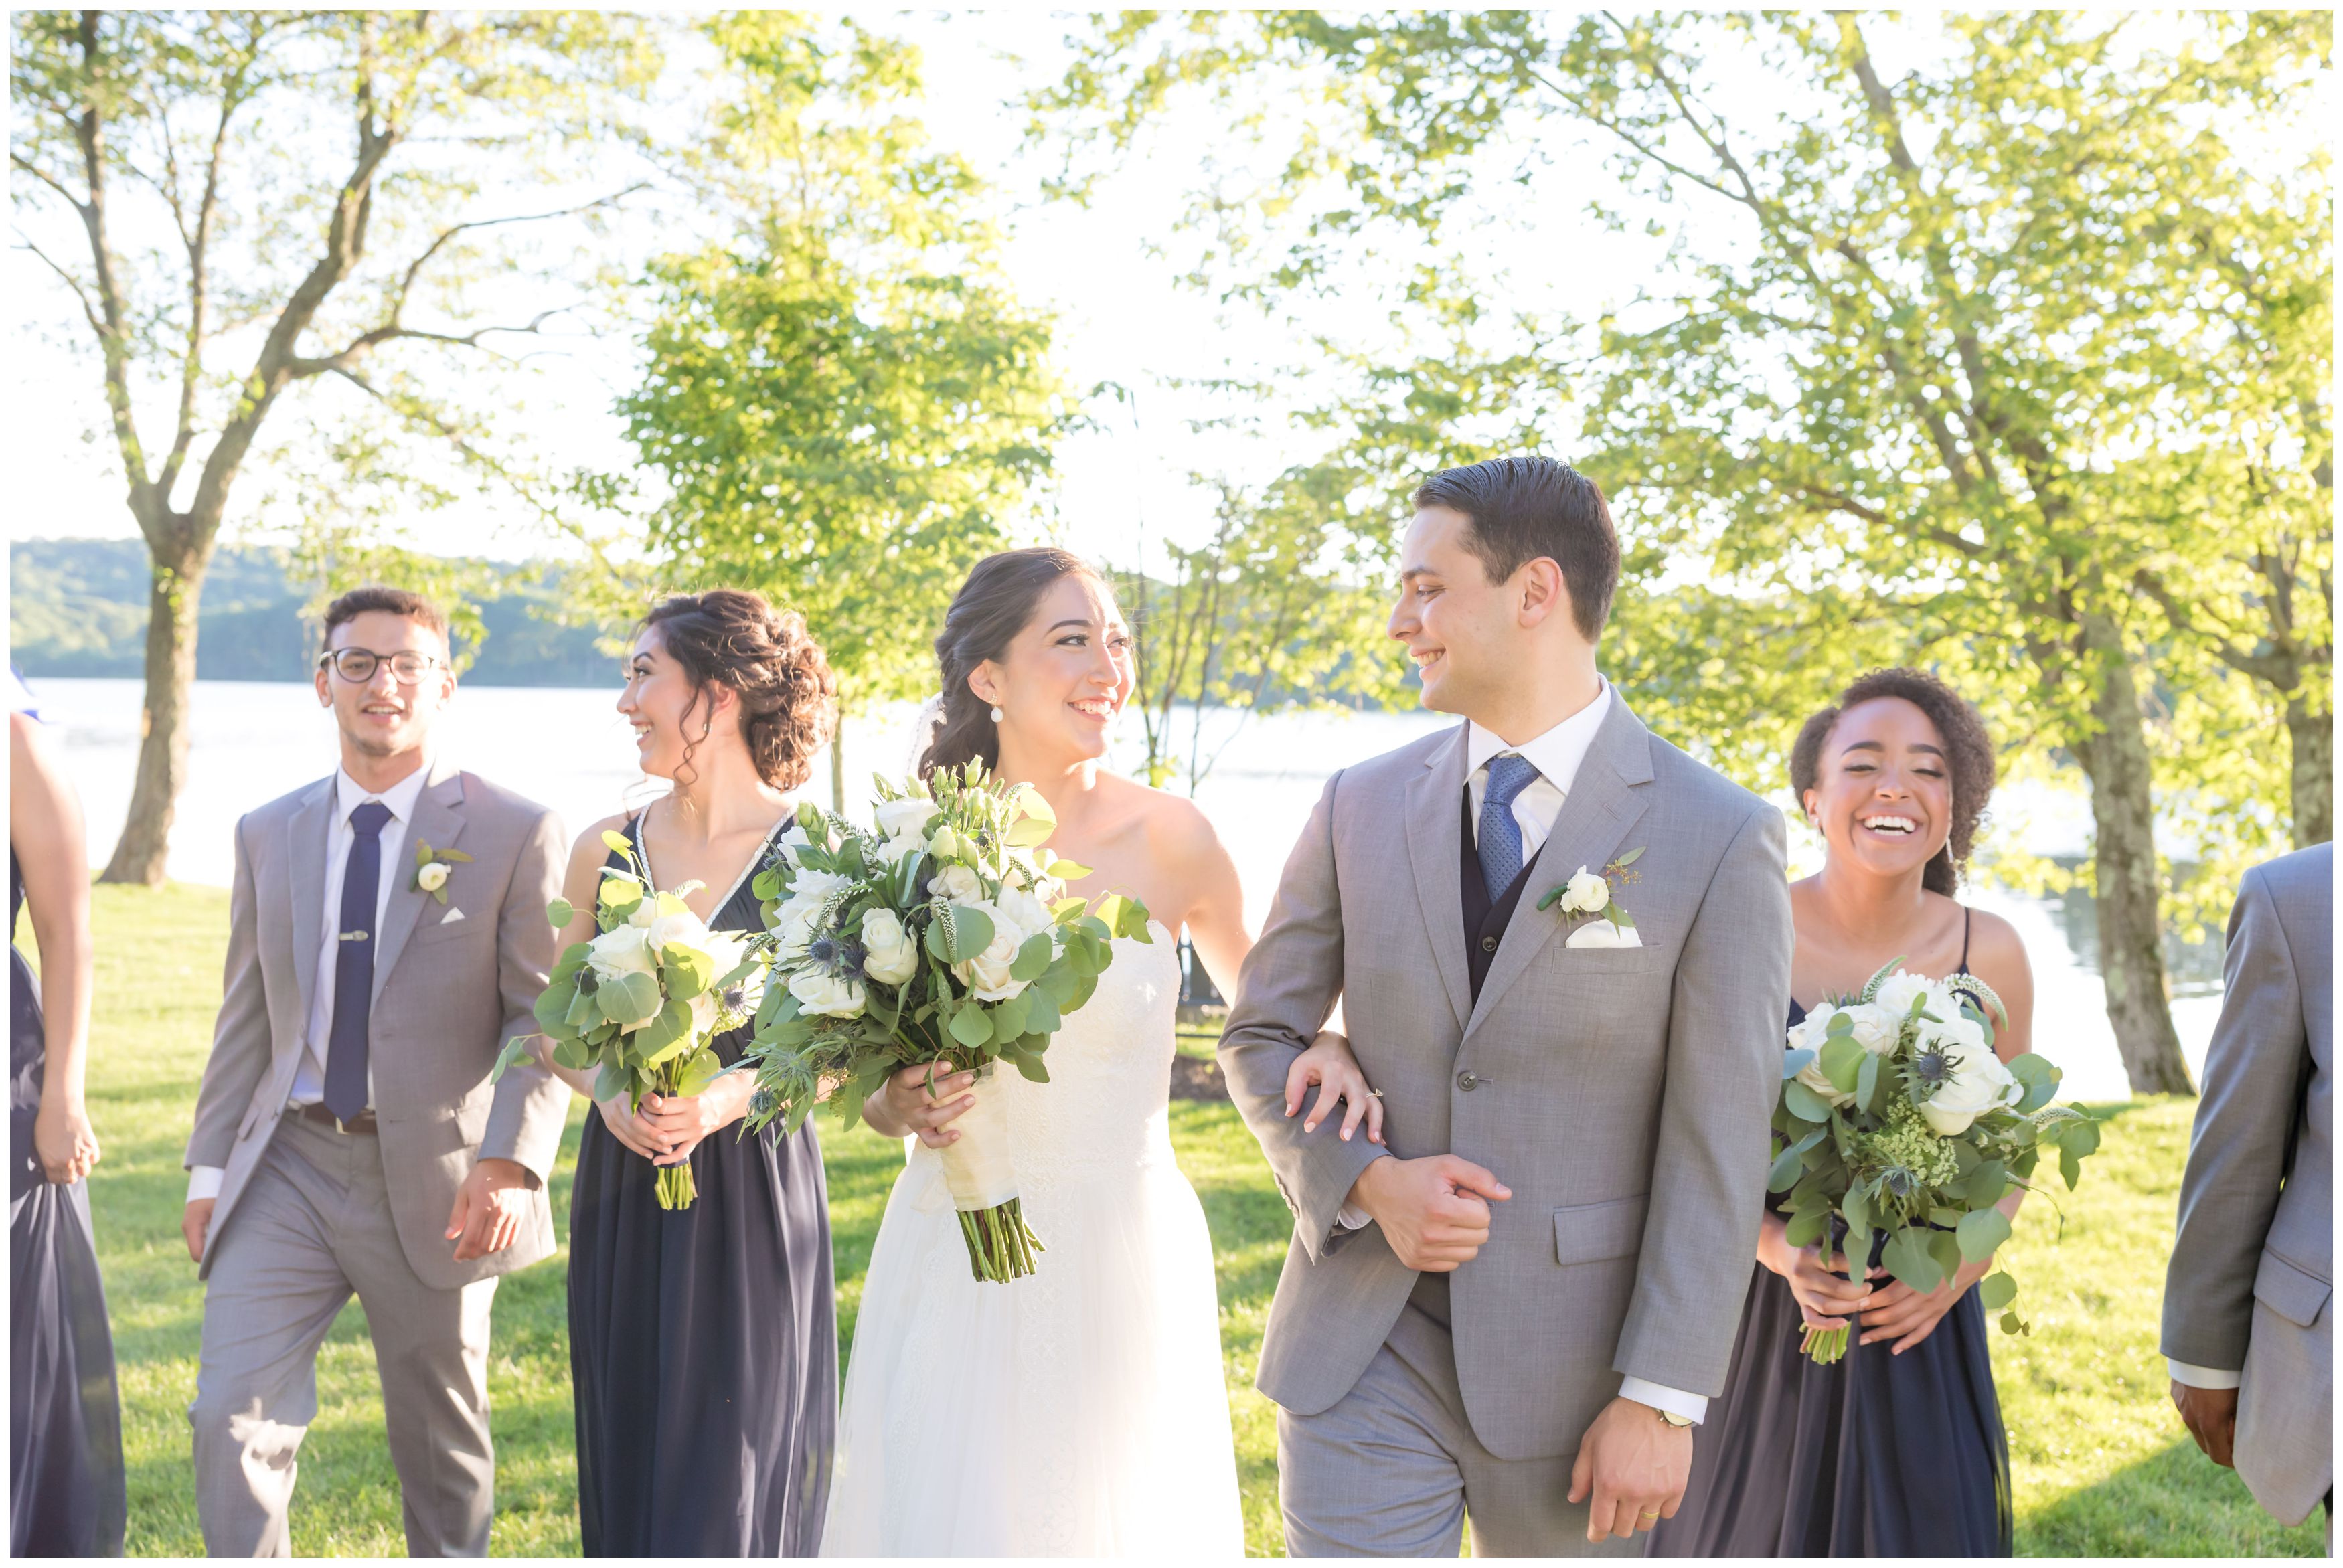 Bride and groom and bridal party at outdoor lakeside wedding